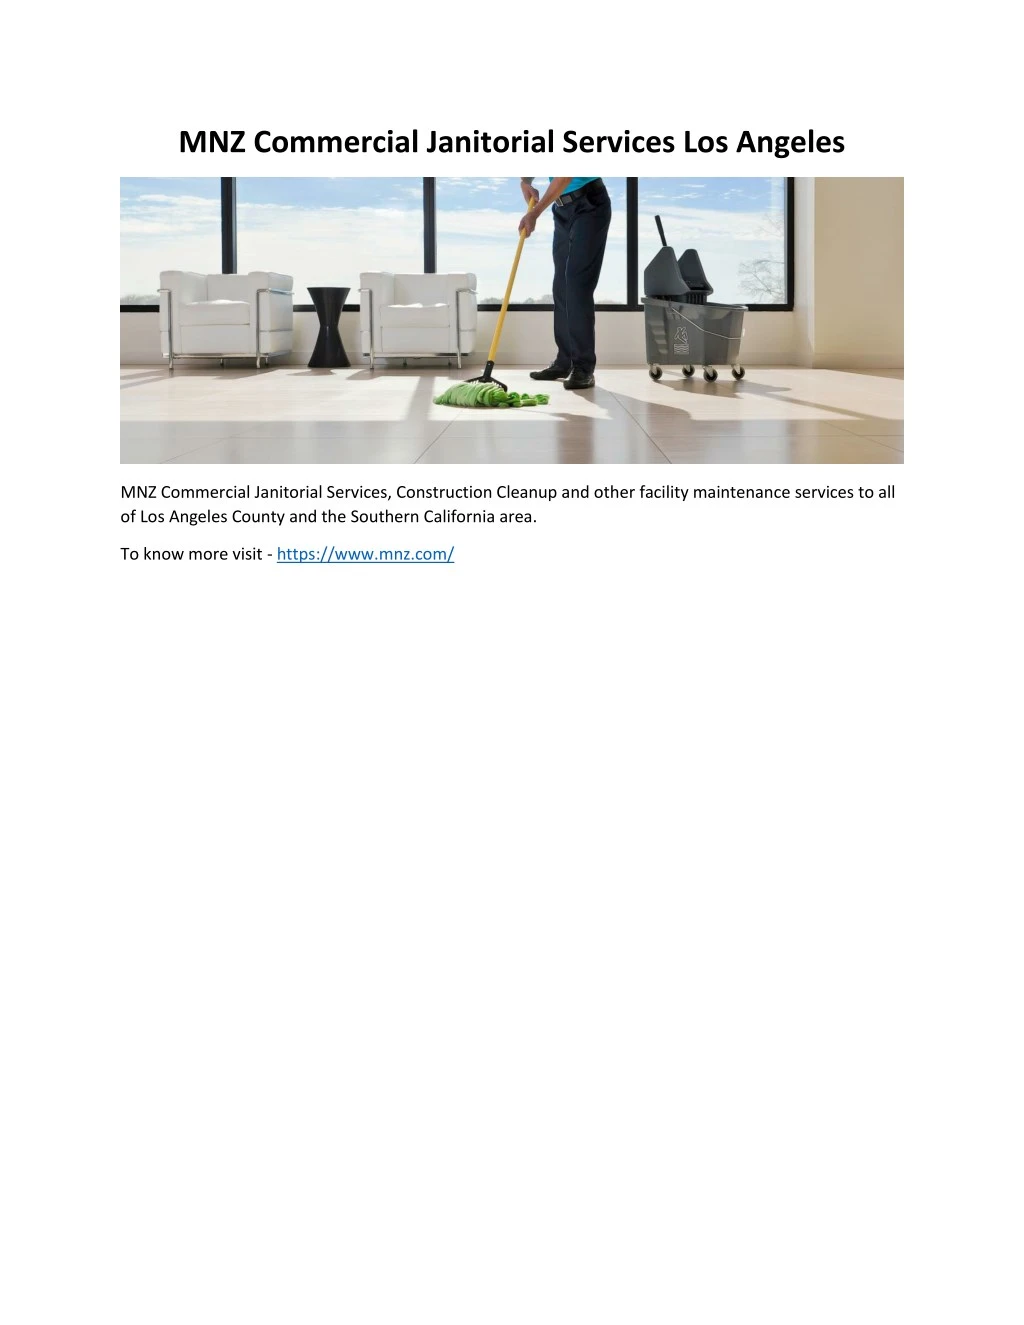 mnz commercial janitorial services los angeles